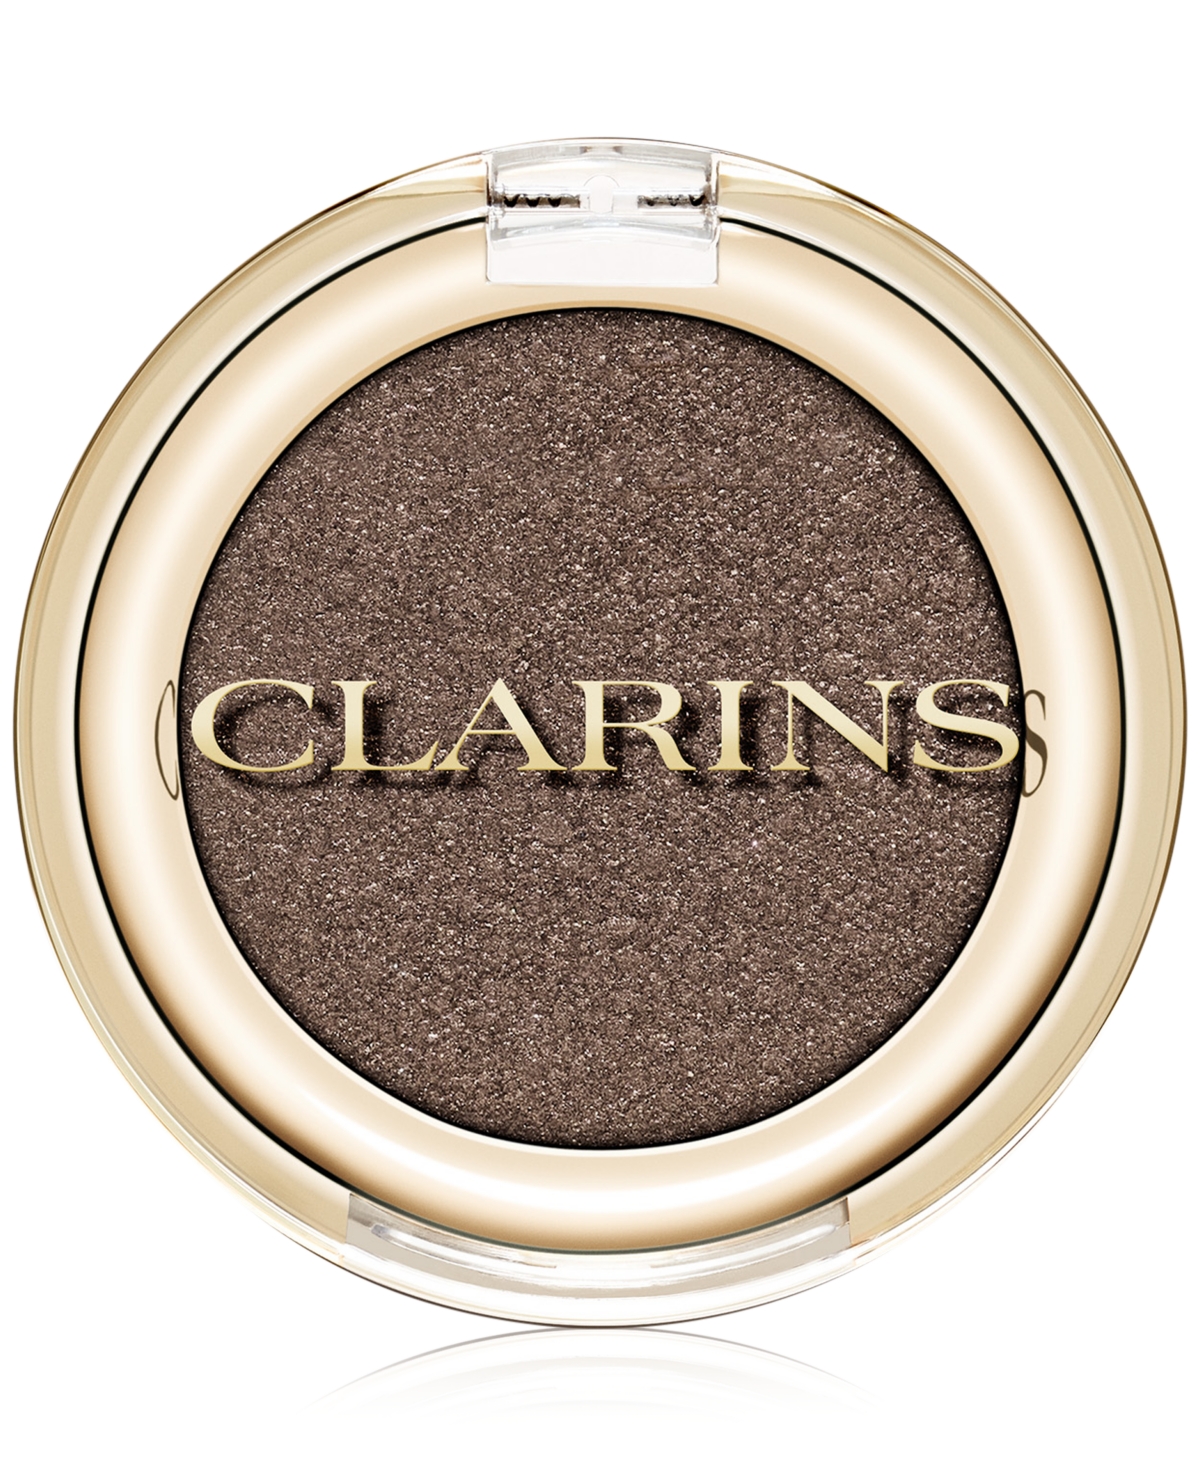 Clarins Ombre Skin Highly Pigmented & Crease-proof Eyeshadow In Satin Mocha